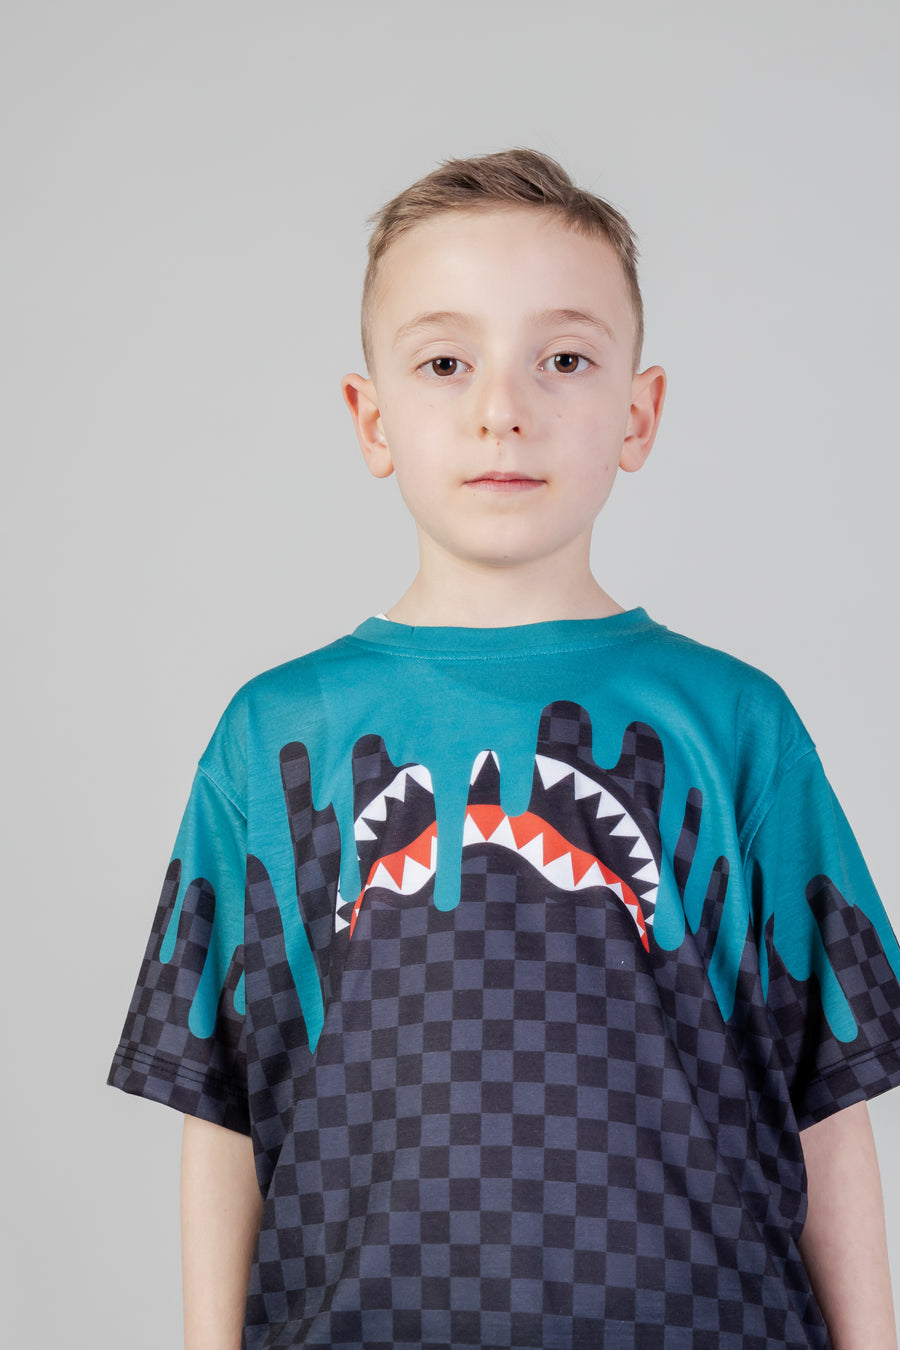 Youth - Sprayground T-shirt COLOR DRIPPING GREY CHECK T-SHIRT YOUTH Green